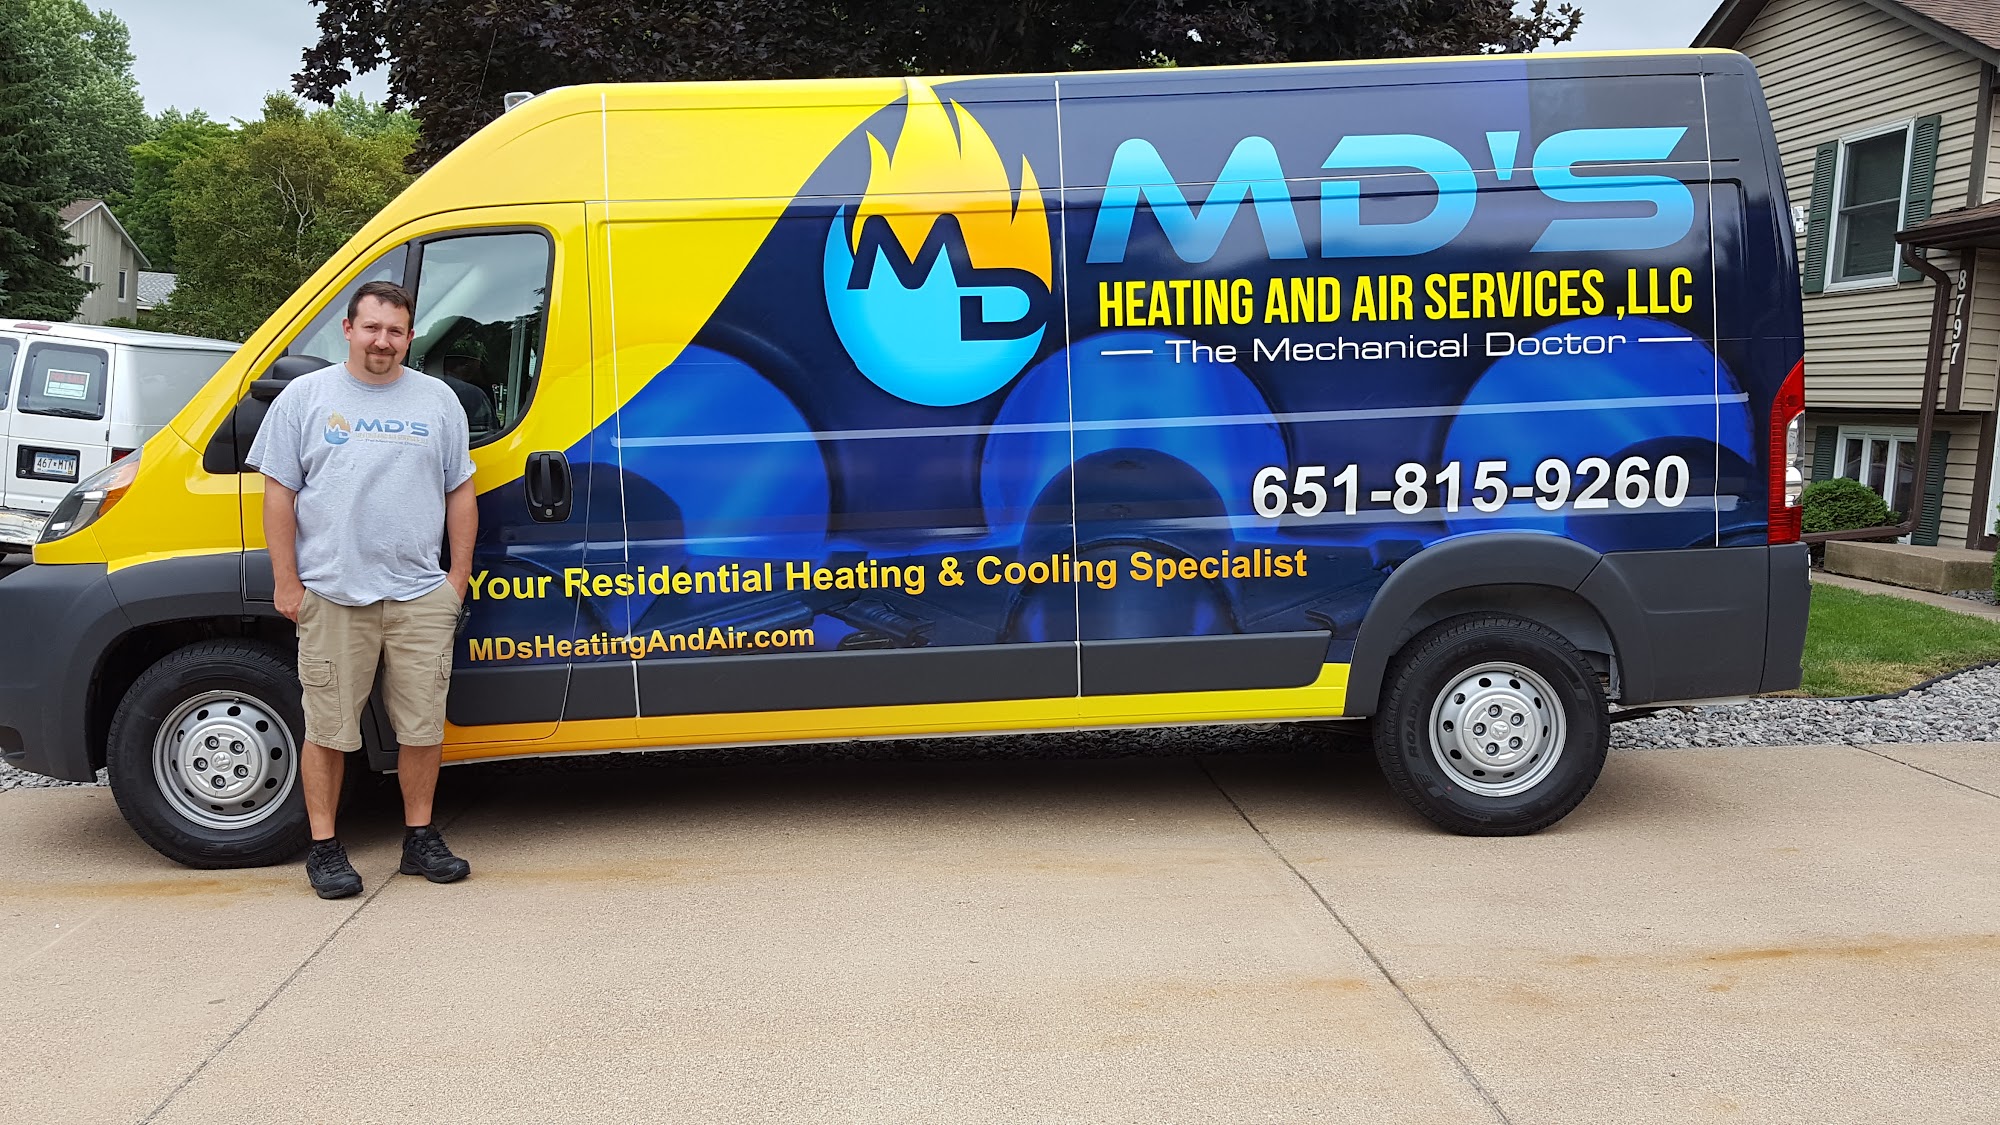 MD's Heating and Air Services LLC